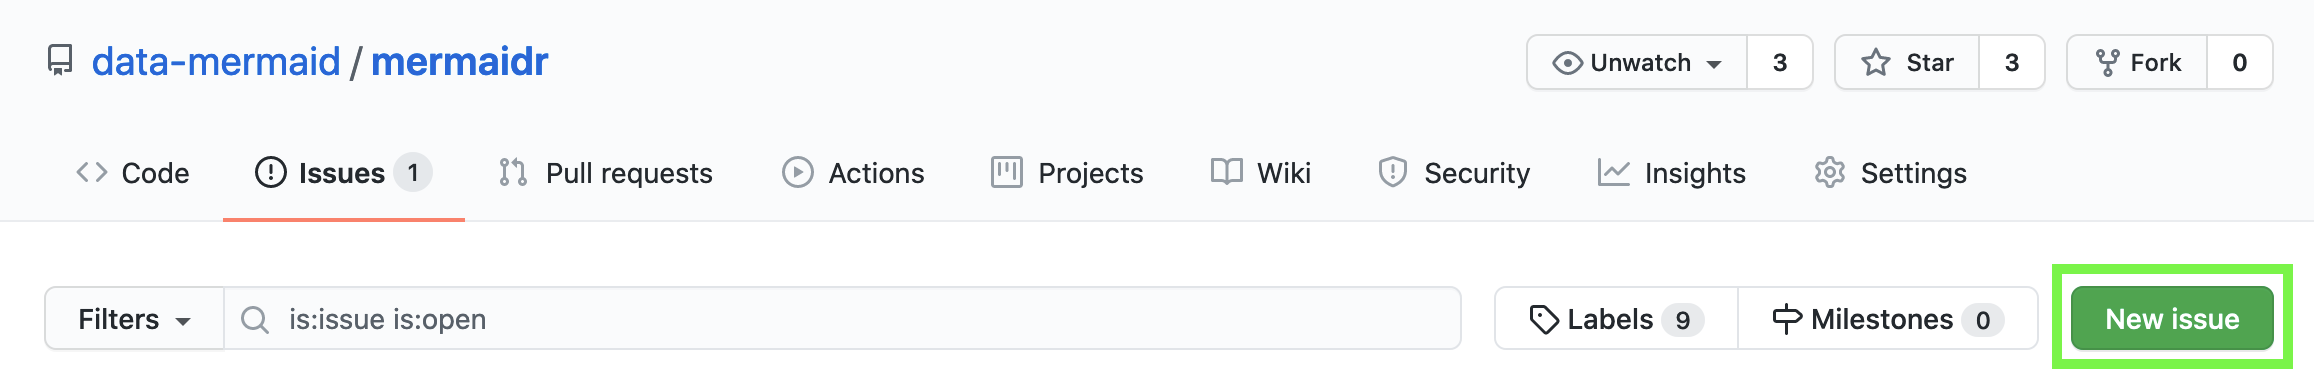 A screenshot of the mermaidr issue's page on GitHub, with the new issue button highlighted.